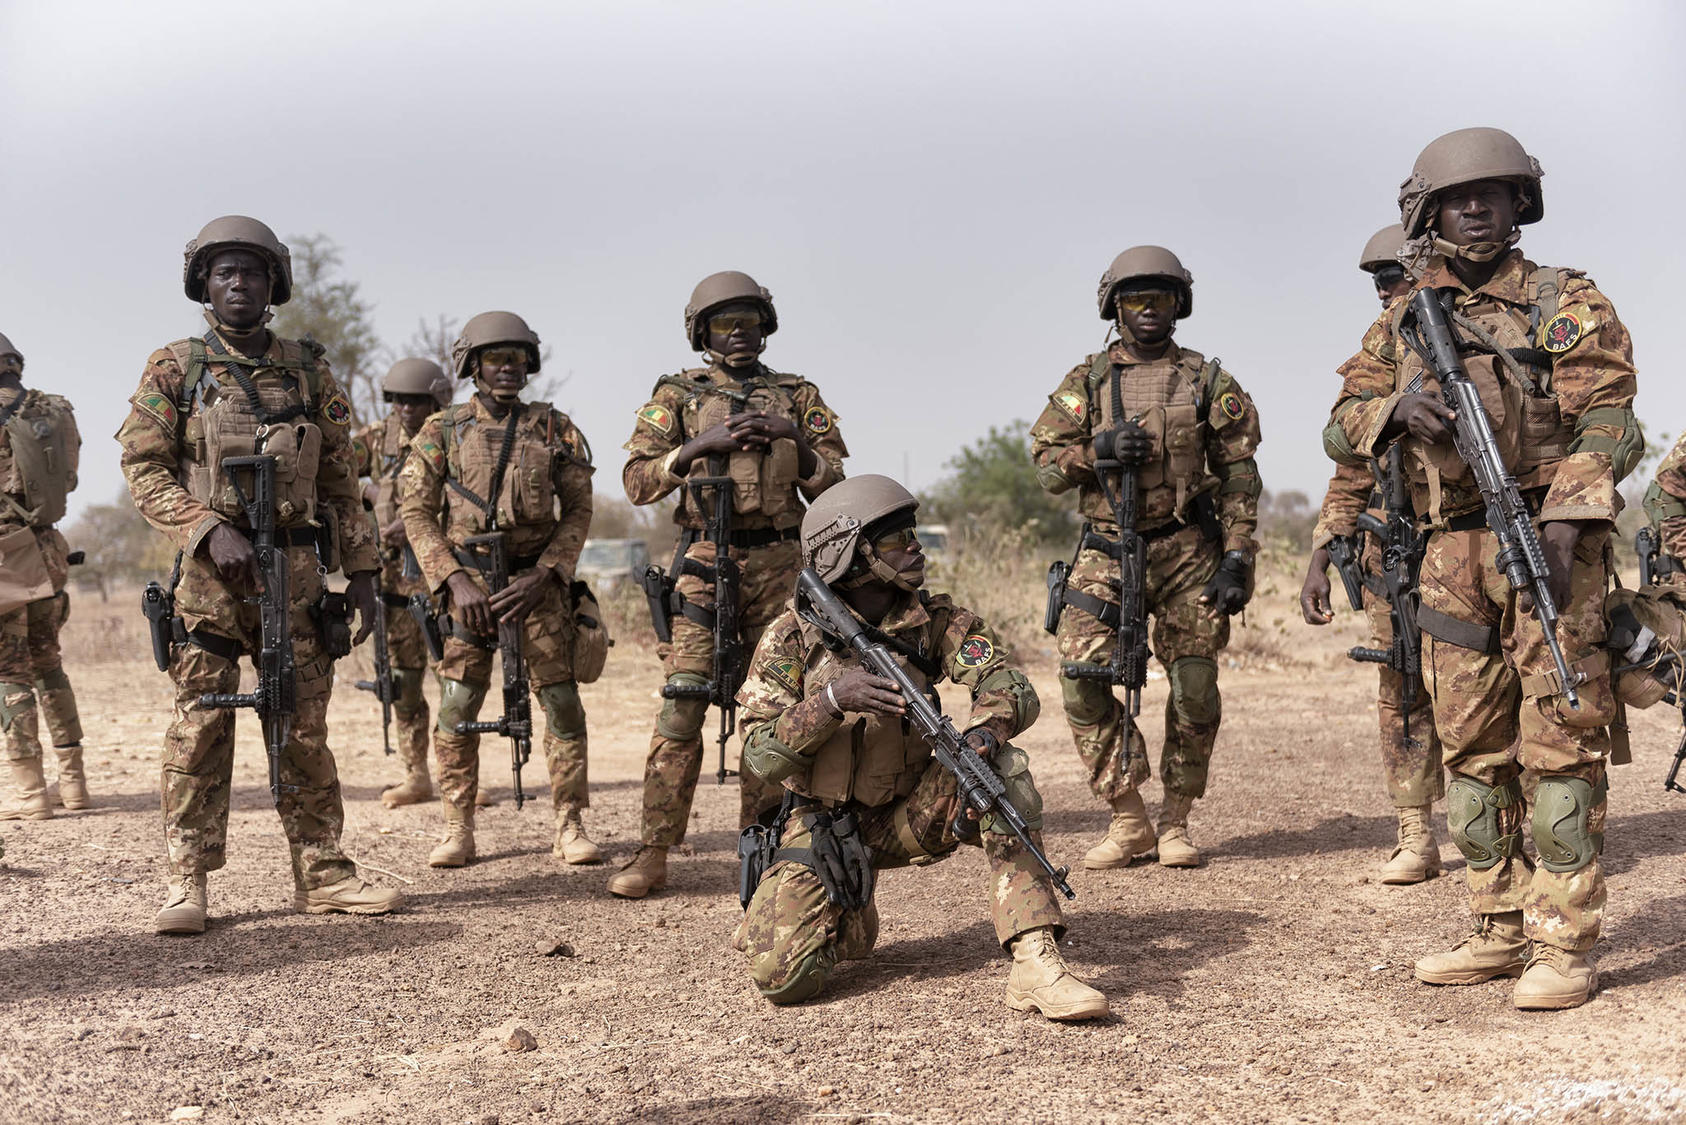 Malian soldiers train at a firing range in Burkina Faso in 2019, part of an international effort to respond to the Sahel’s extremist violence mainly by bulking up security forces. That approach has proved insufficient. (Laetitia Vancon/The New York Times)